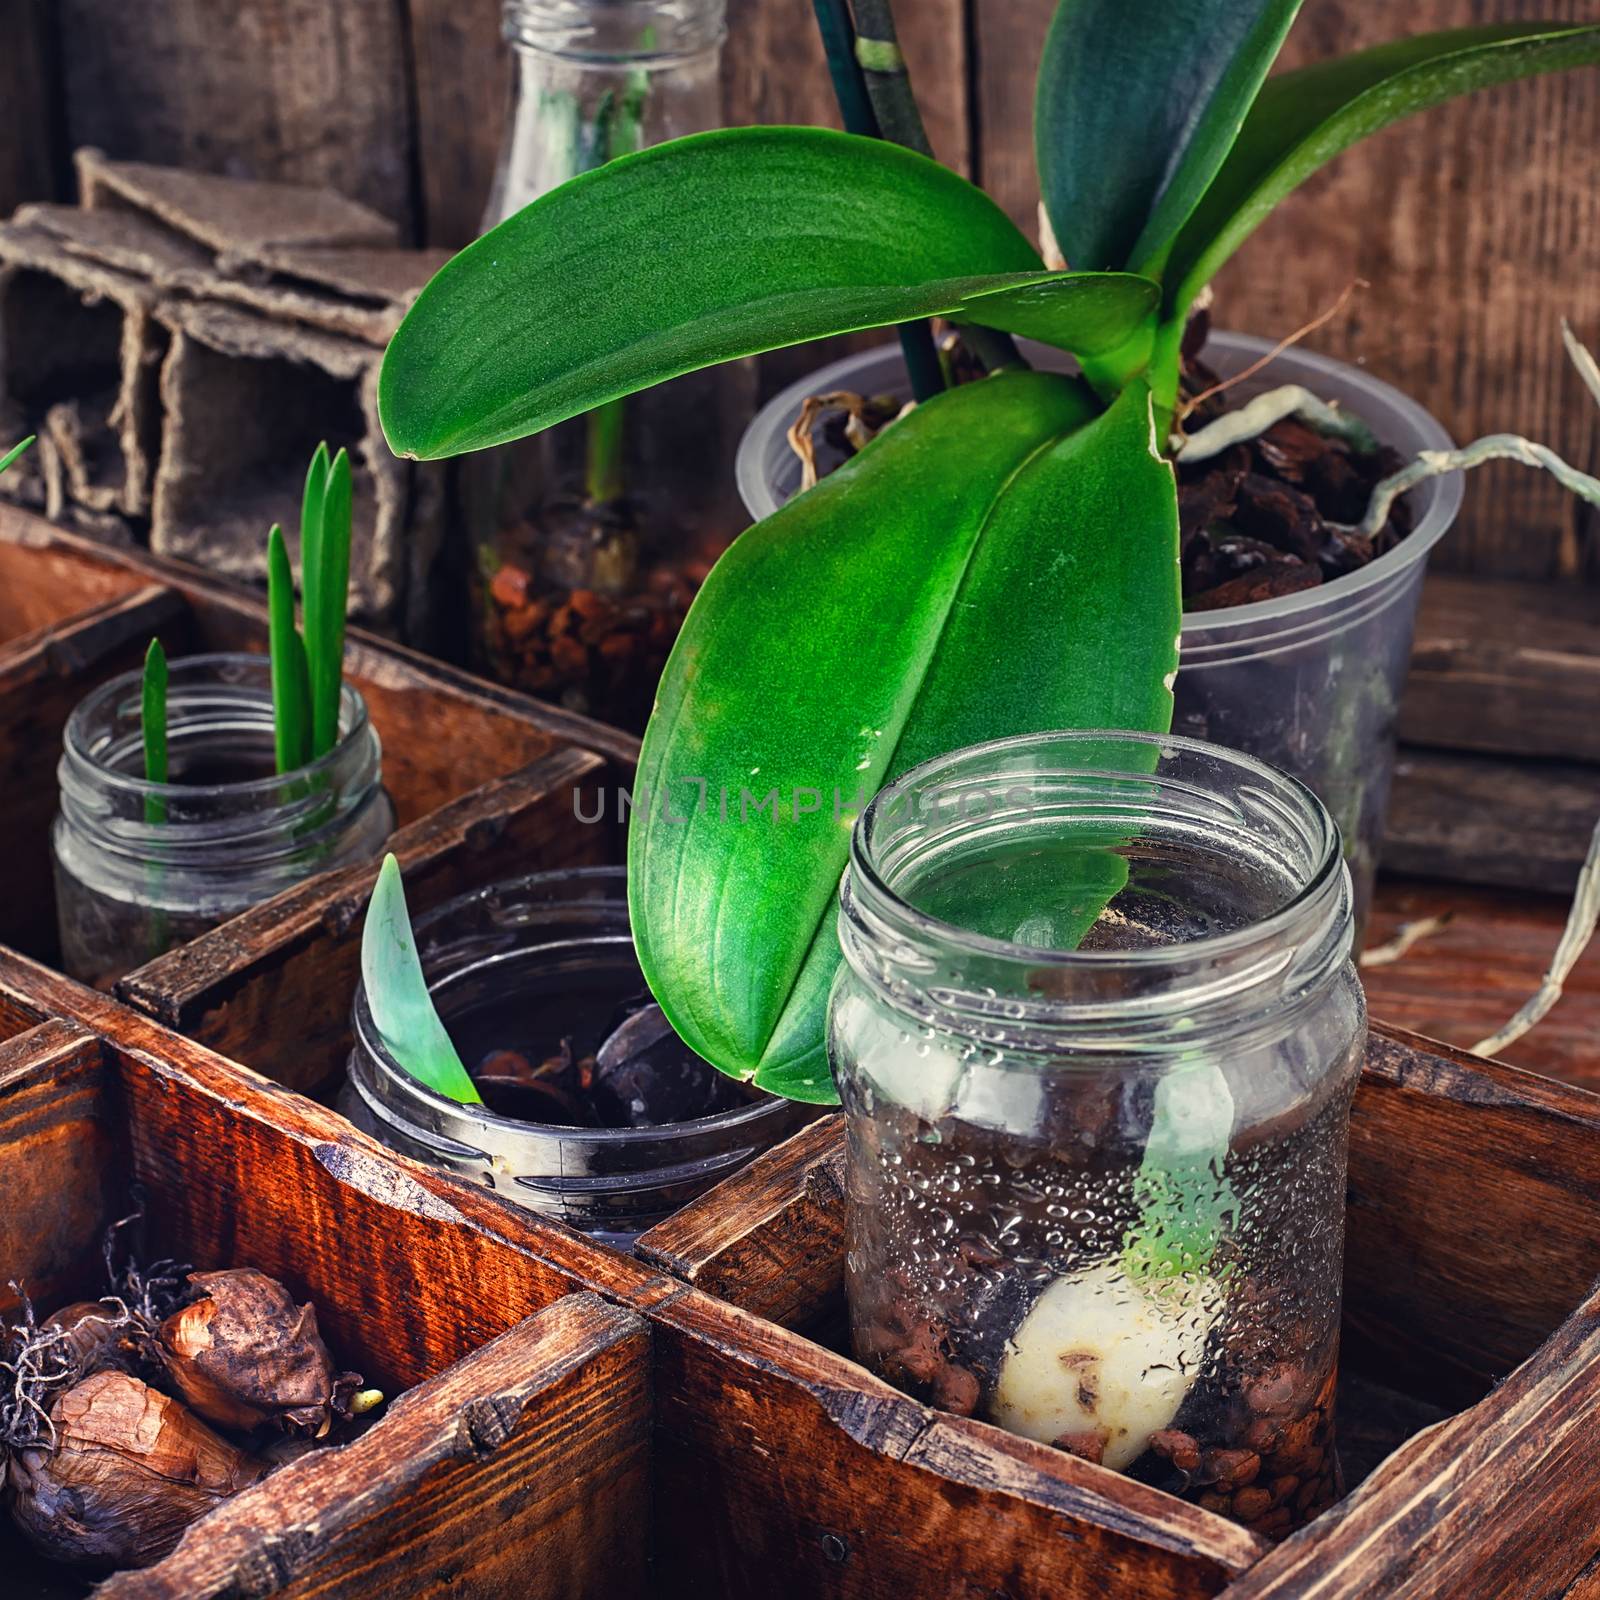 Bulbs and plant shoots and spring flowers in wooden box.